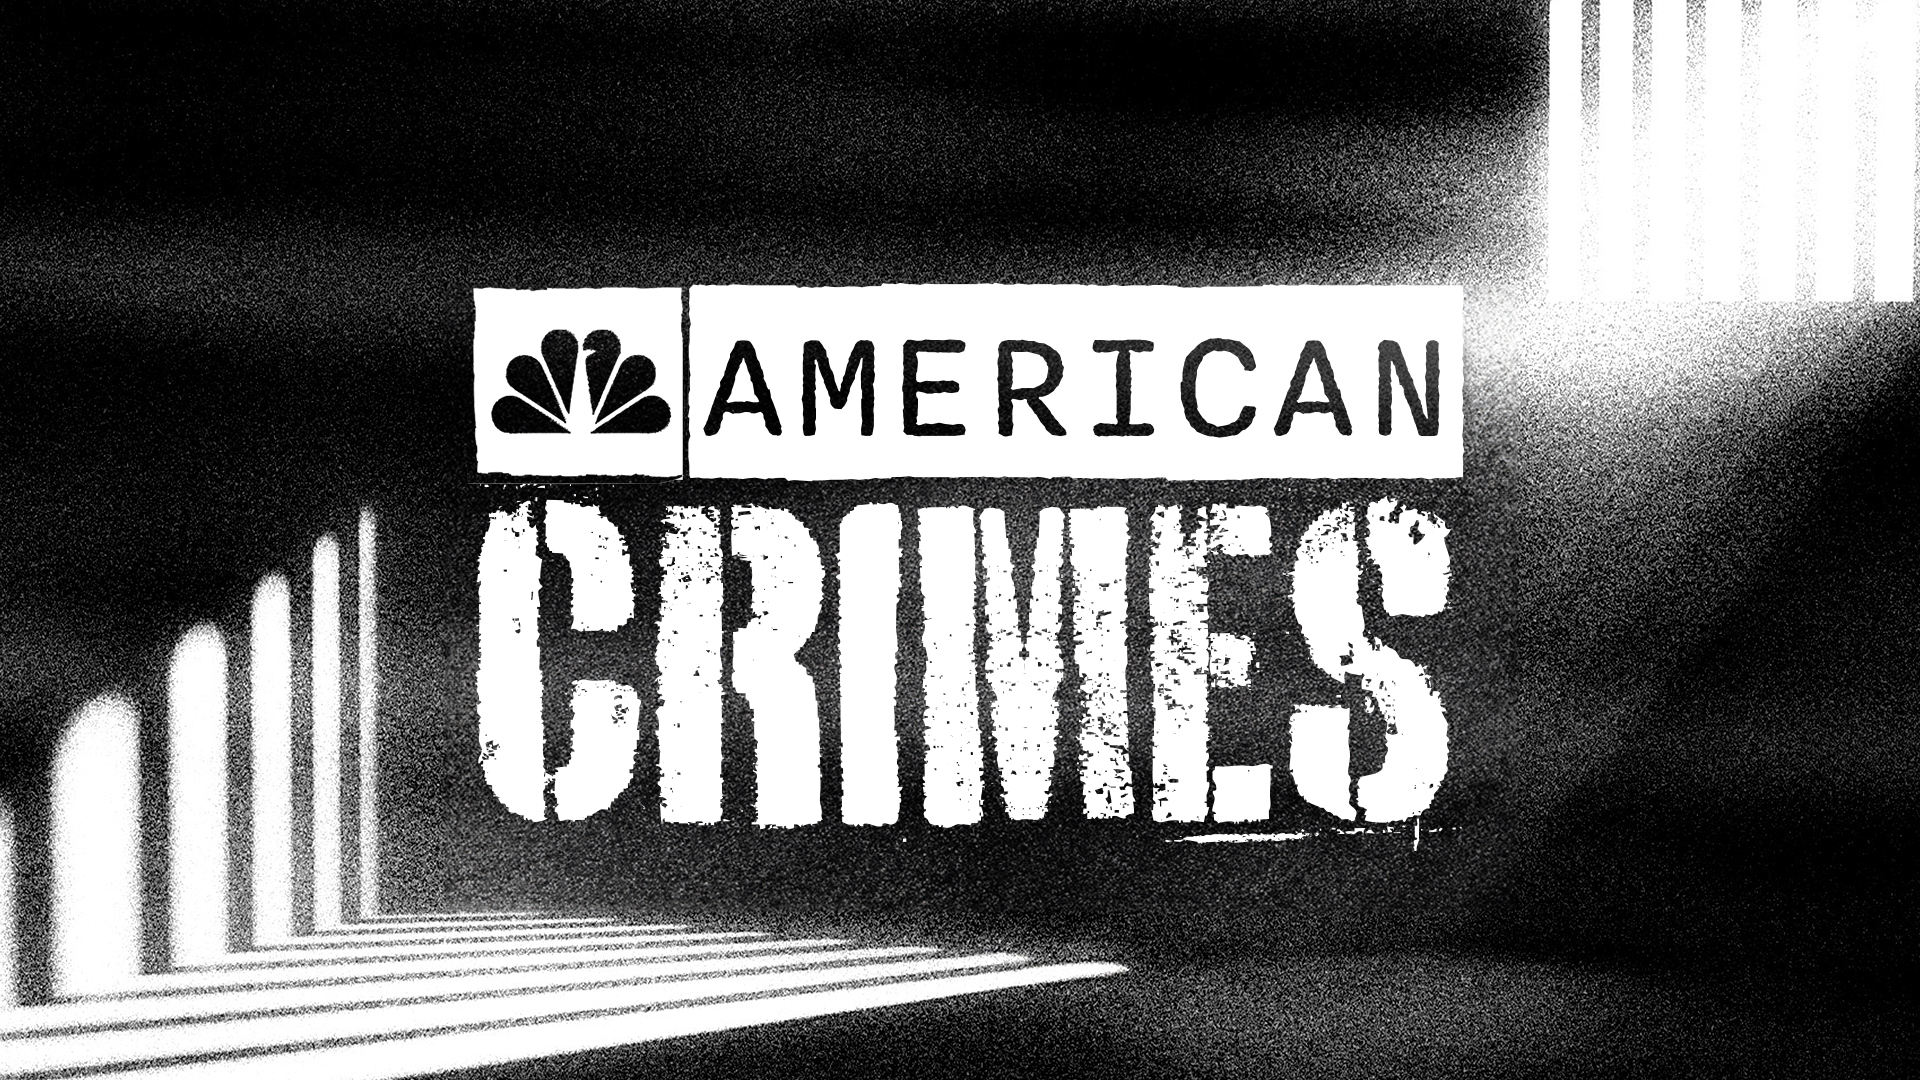 NBCUniversal Quietly Rebrands The Cable TV Network NBC LX Home & Launches American Crimes to Replace It As NBC LX Home Becomes a Free Streaming Only Channel